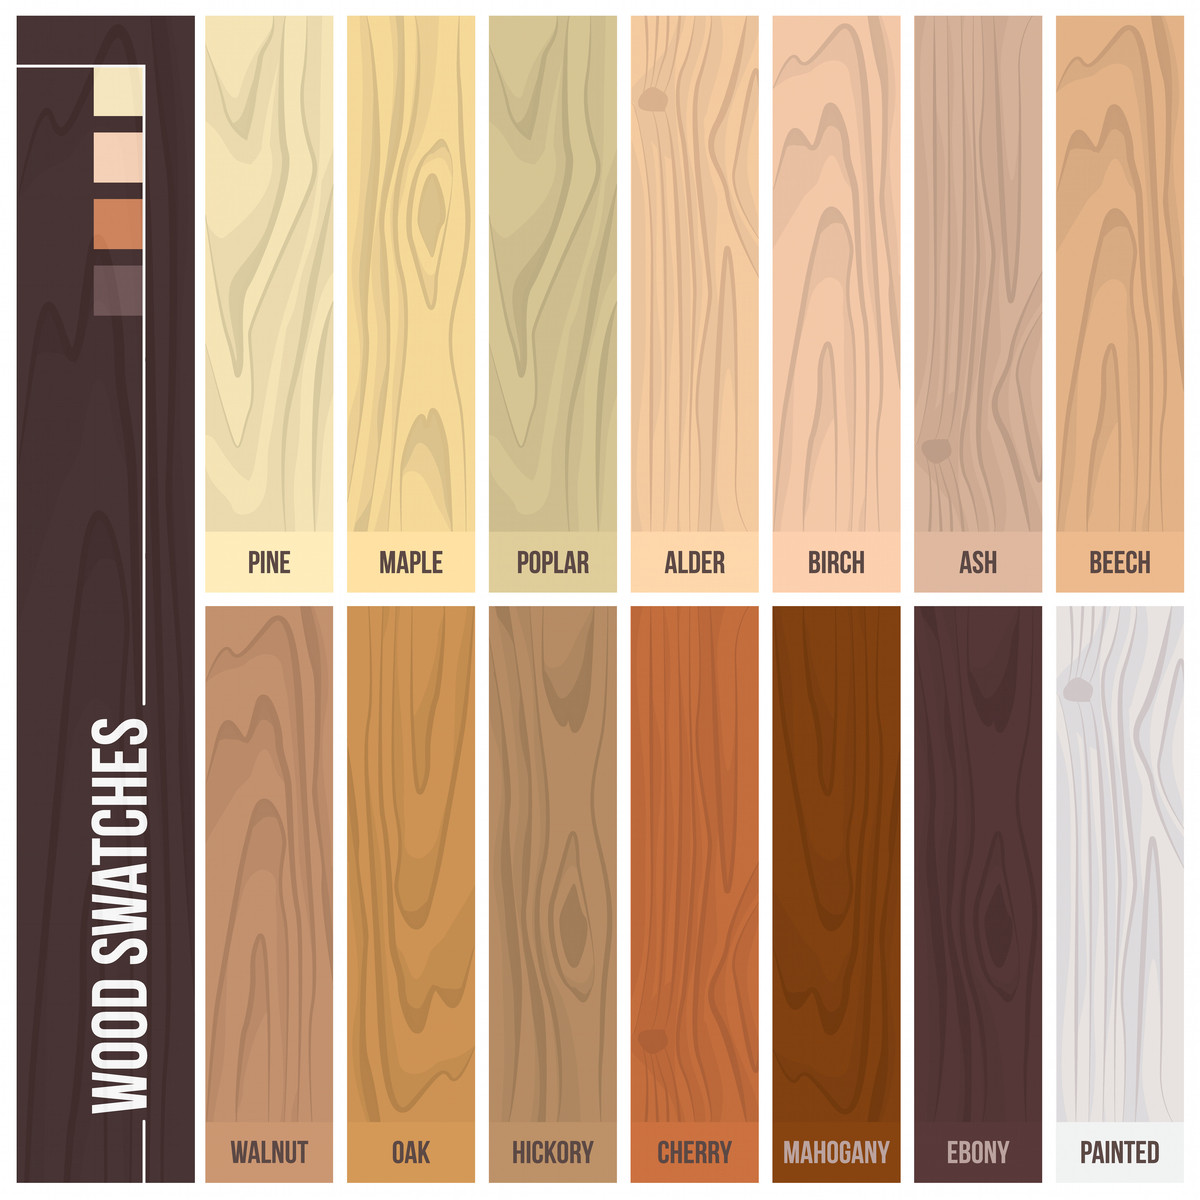 21 Fashionable 3 4 Inch Hardwood Flooring Prices 2024 free download 3 4 inch hardwood flooring prices of 12 types of hardwood flooring species styles edging dimensions with types of hardwood flooring illustrated guide